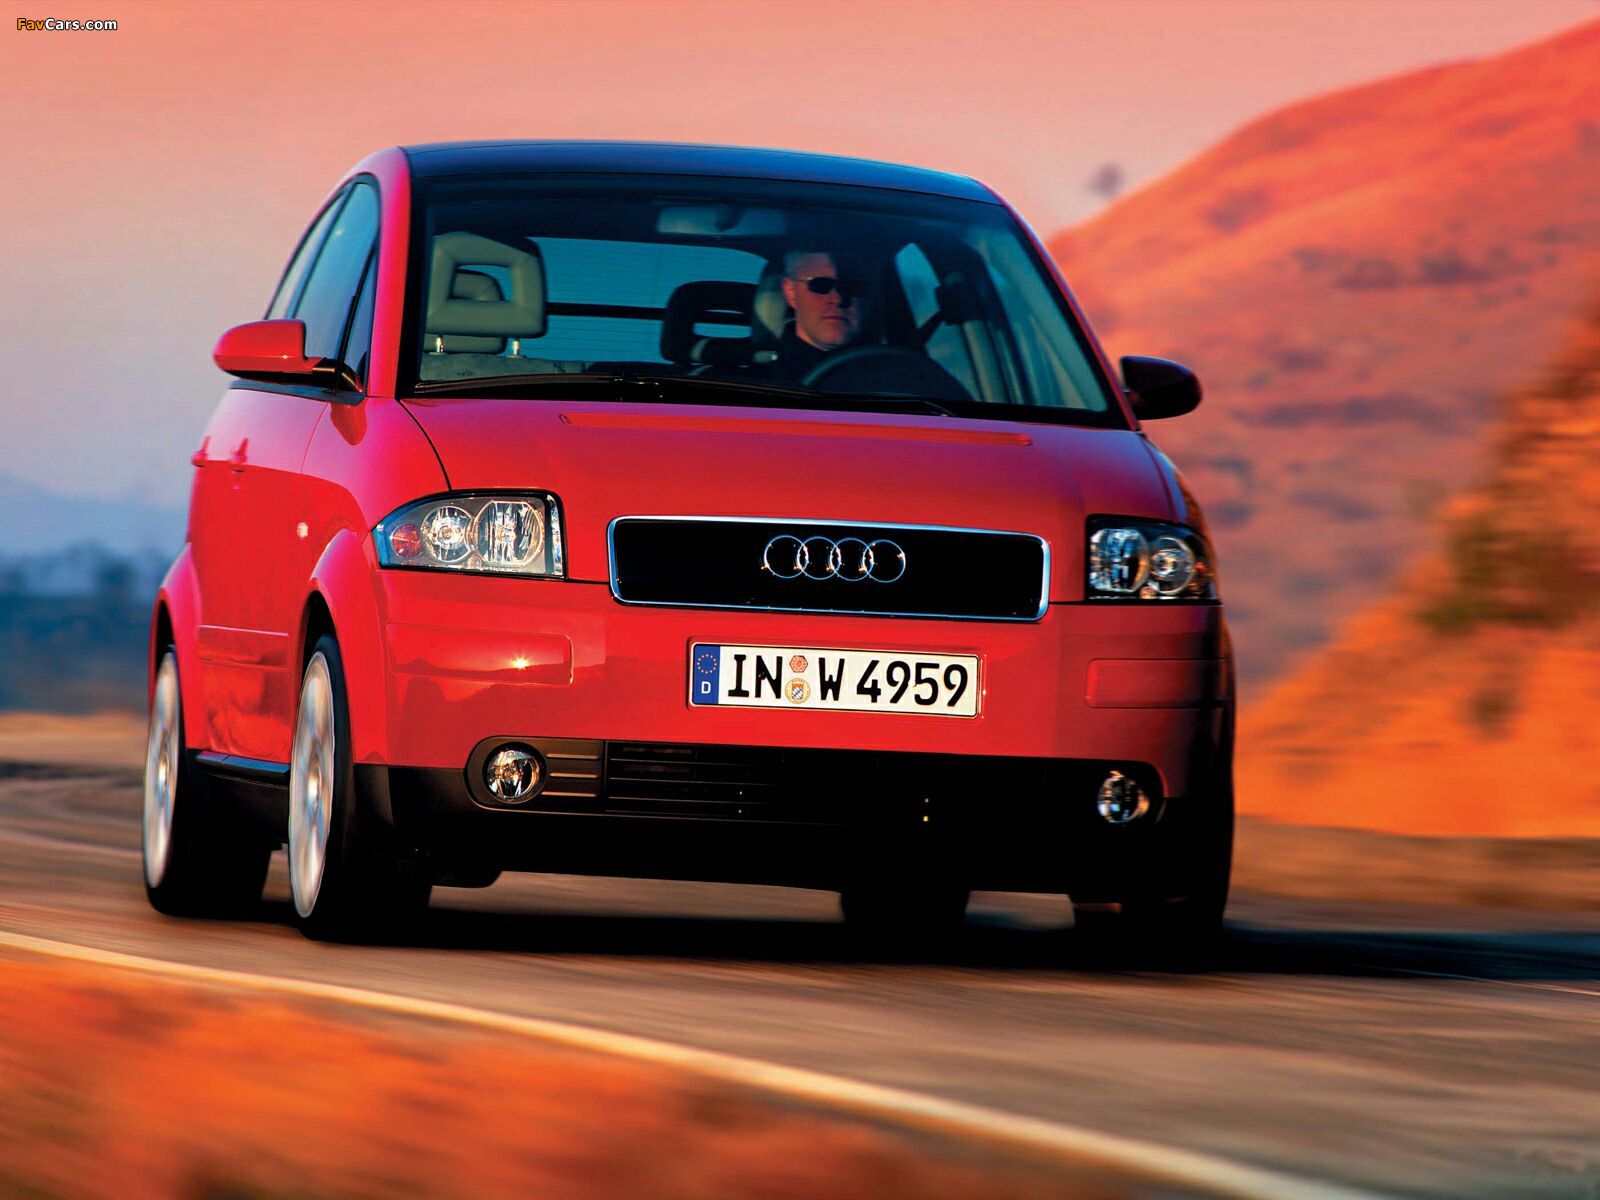 Audi A2 1.6 FSI (2004-2005) pictures (1600x1200)